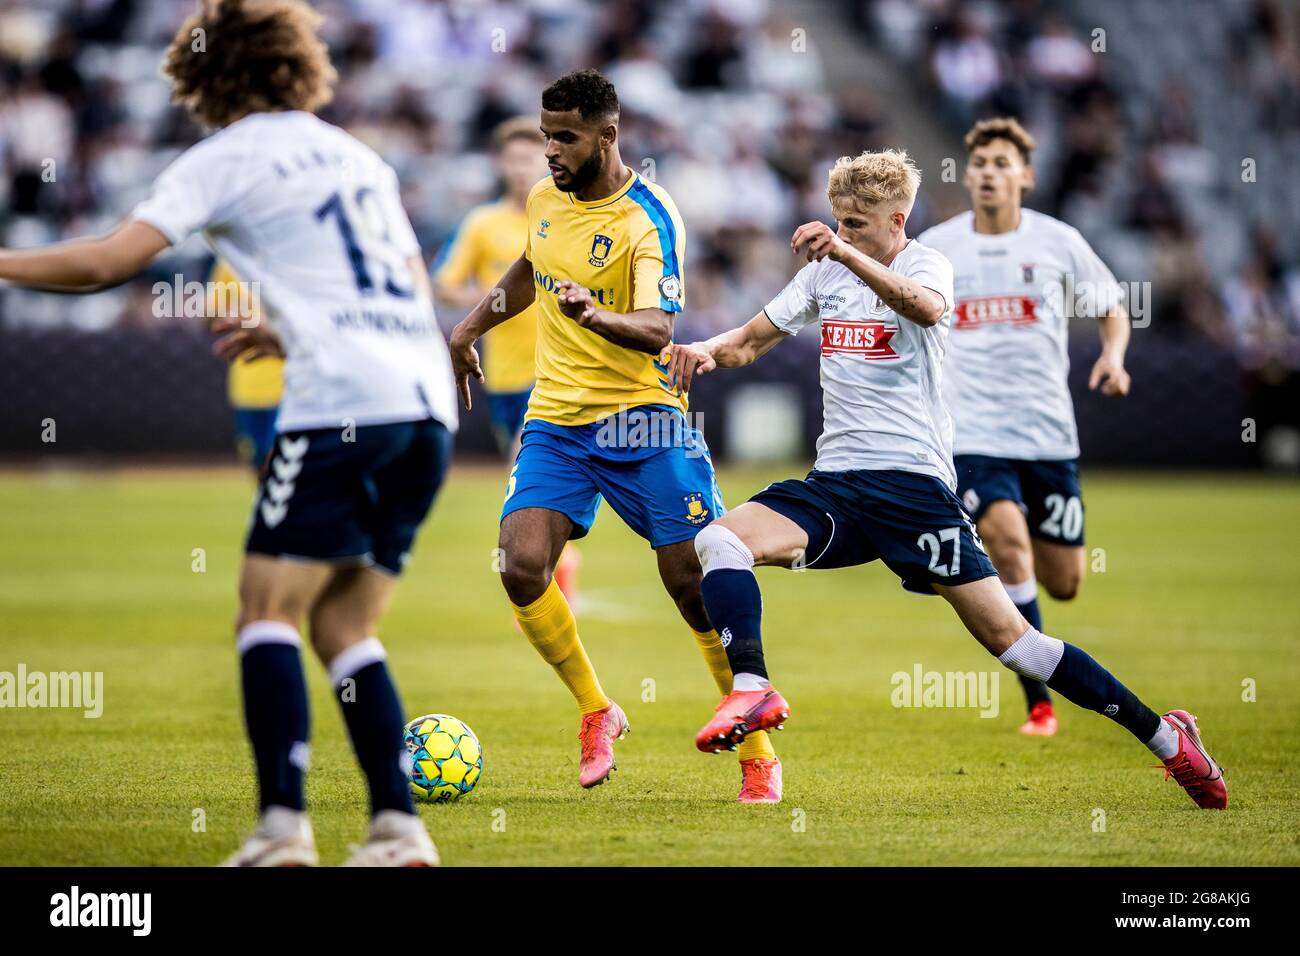 Aarhus, Denmark. 18th July, 2021. Anis Ben Slimane (25) of Broendby IF and Albert Gronbaek (27) of AGF seen during the 3F Superliga match between Aarhus GF and Broendby IF at Ceres Park in Aarhus. (Photo Credit: Gonzales Photo/Alamy Live News Stock Photo